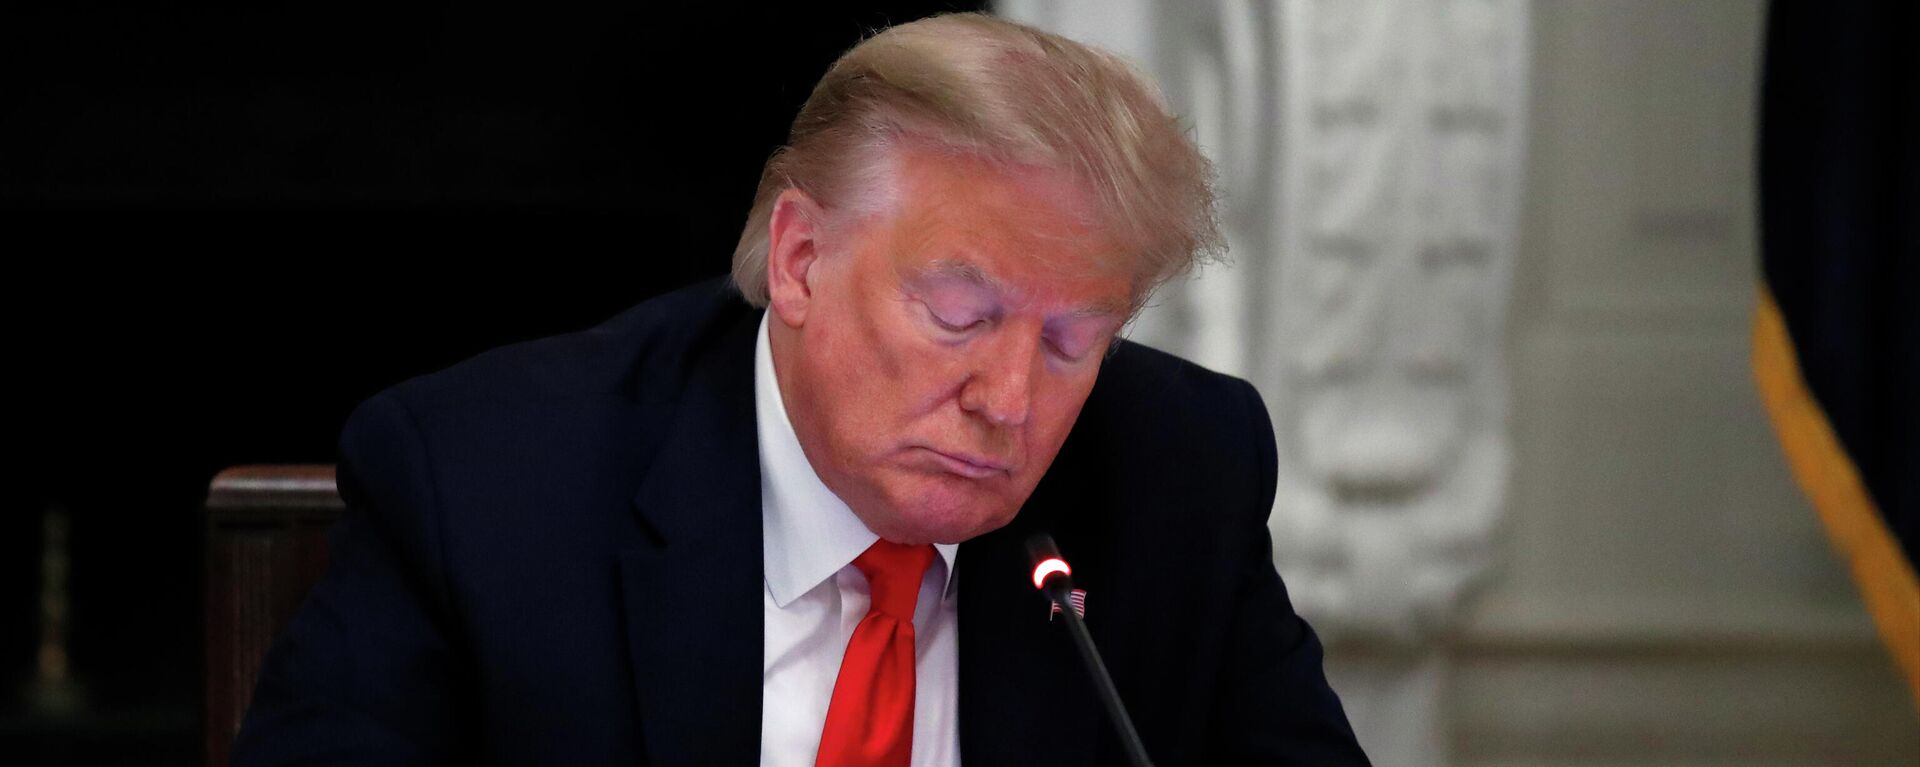  In this Thursday, June 18, 2020 file photo, President Donald Trump looks at his phone during a roundtable with governors on the reopening of America's small businesses, in the State Dining Room of the White House in Washington. - Sputnik International, 1920, 07.01.2022